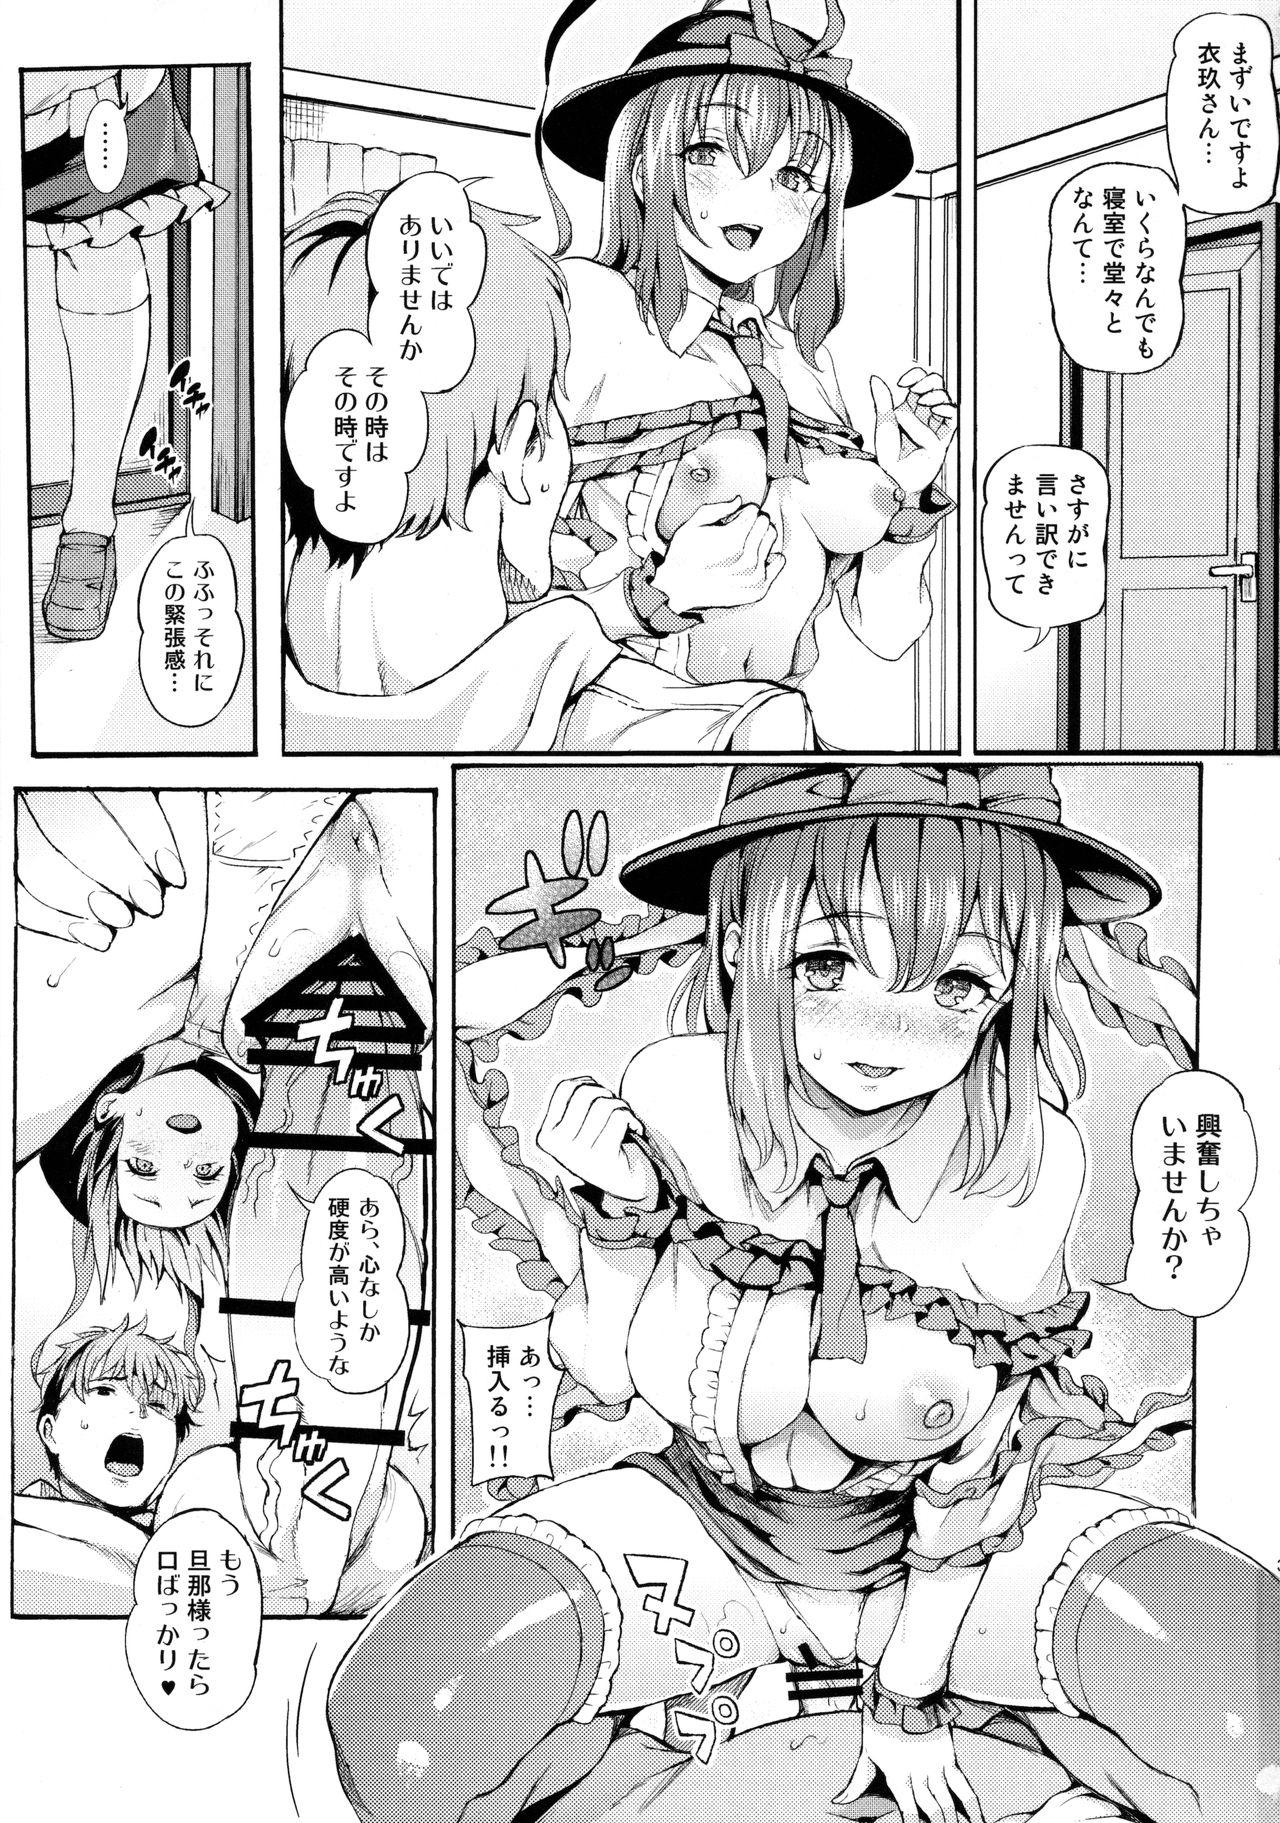 Rough Porn Second marriage - Touhou project Pervert - Page 2